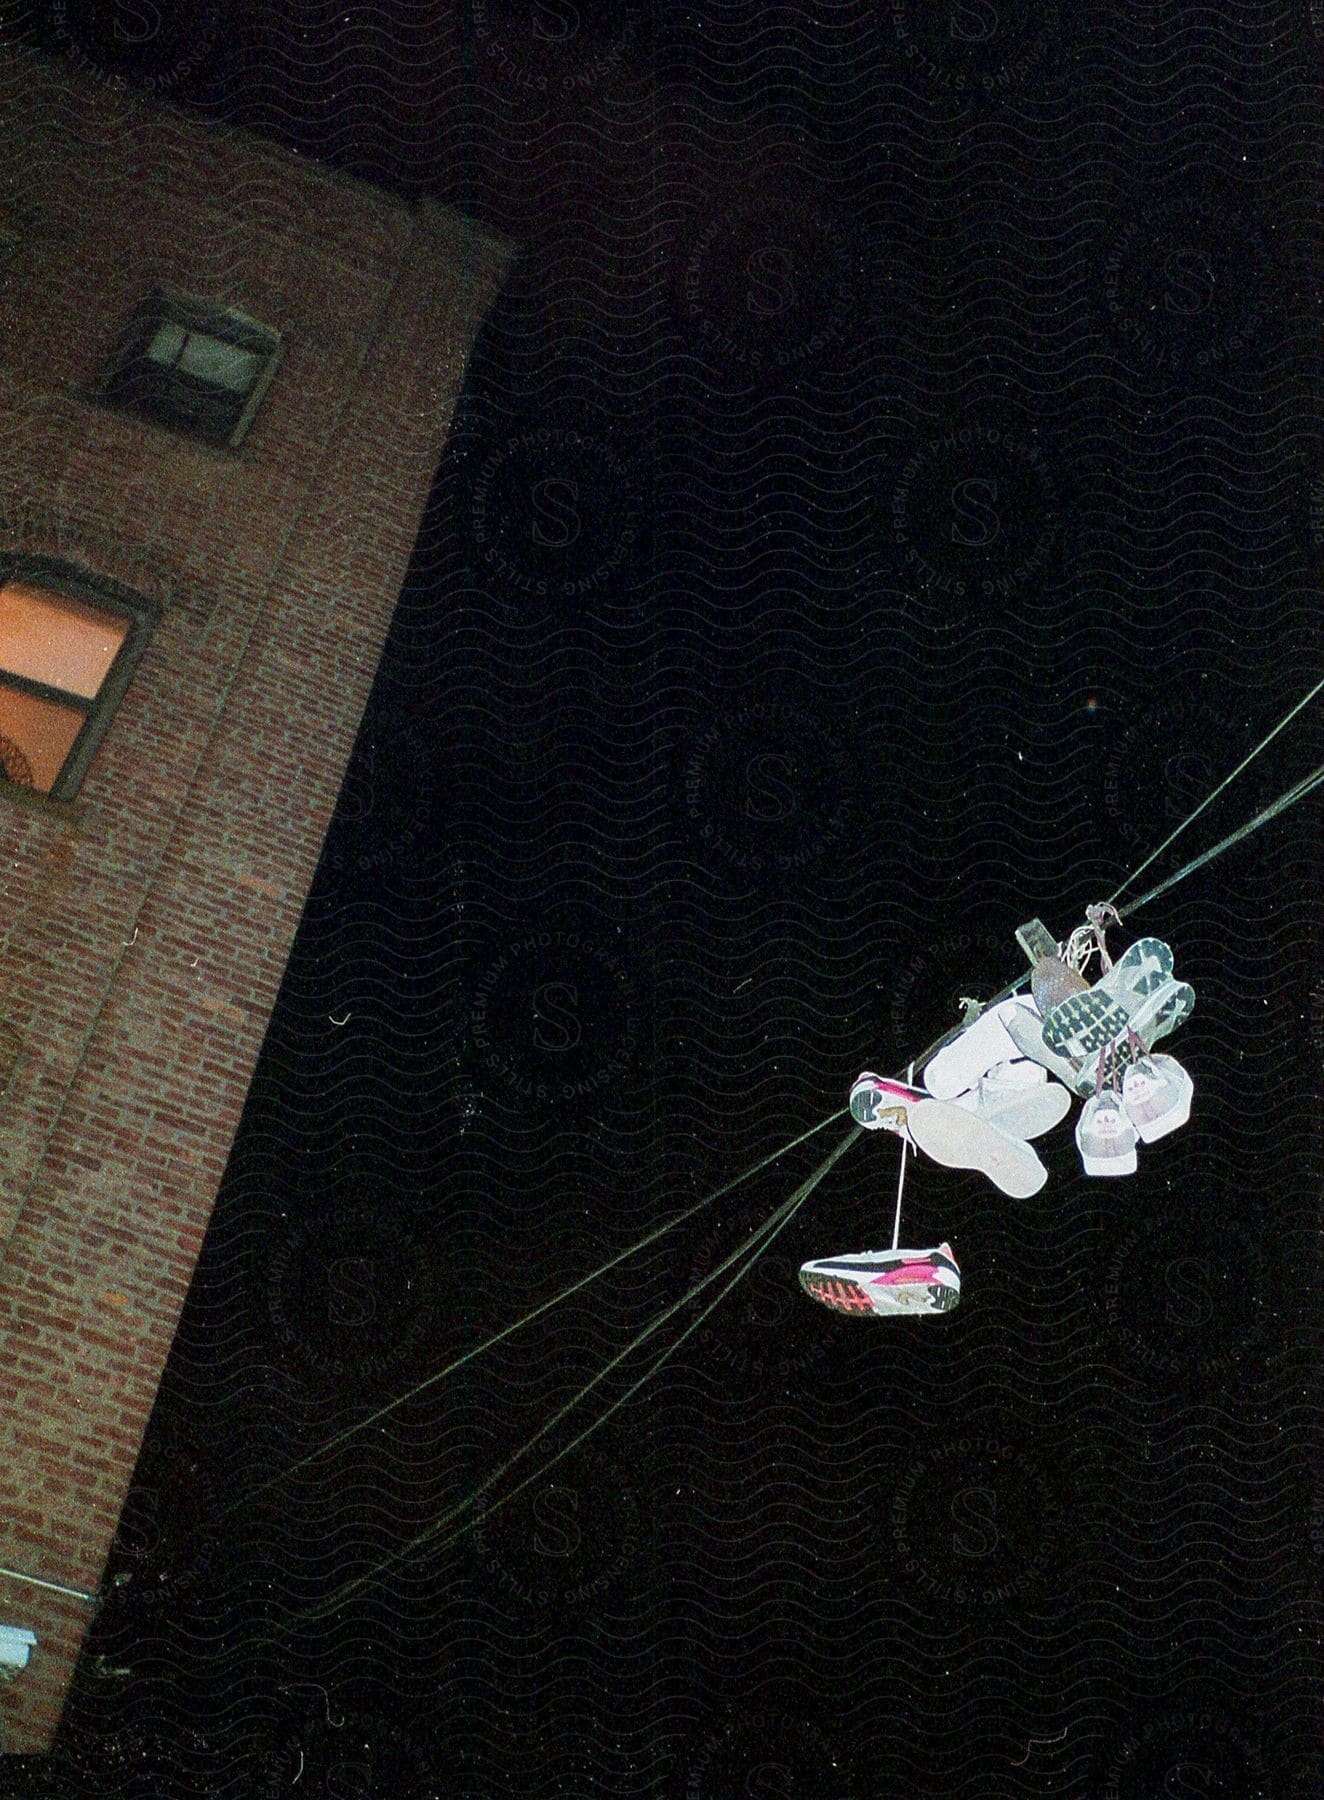 Shoes hanging from a wire against a starry night sky